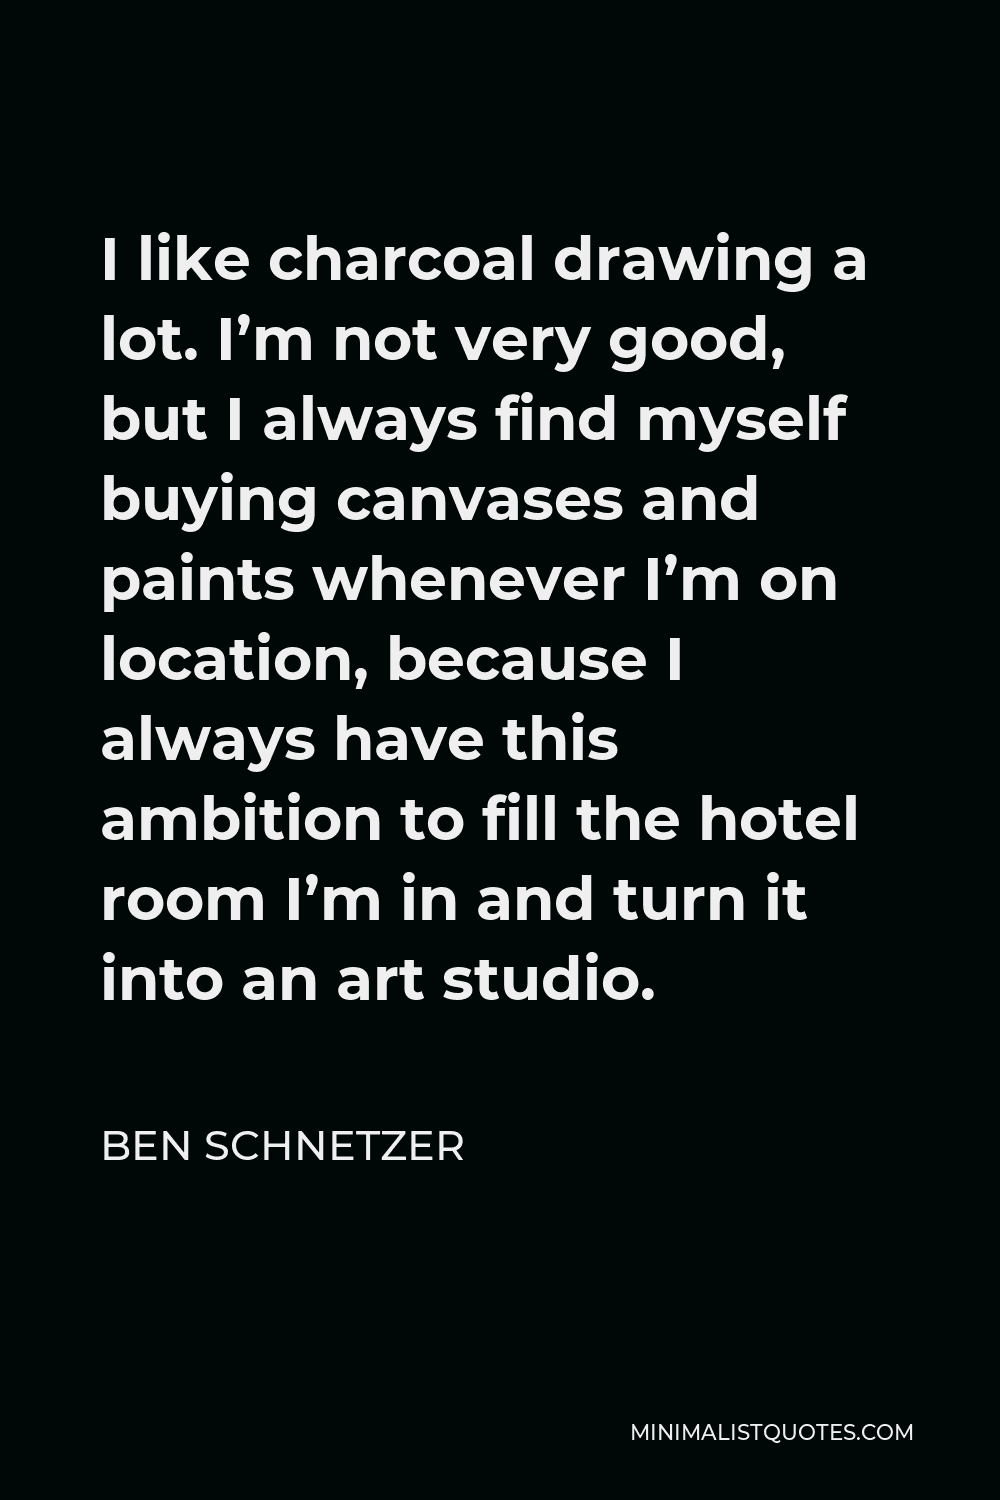 Ben Schnetzer Quote - I like charcoal drawing a lot. I’m not very good, but I always find myself buying canvases and paints whenever I’m on location, because I always have this ambition to fill the hotel room I’m in and turn it into an art studio.